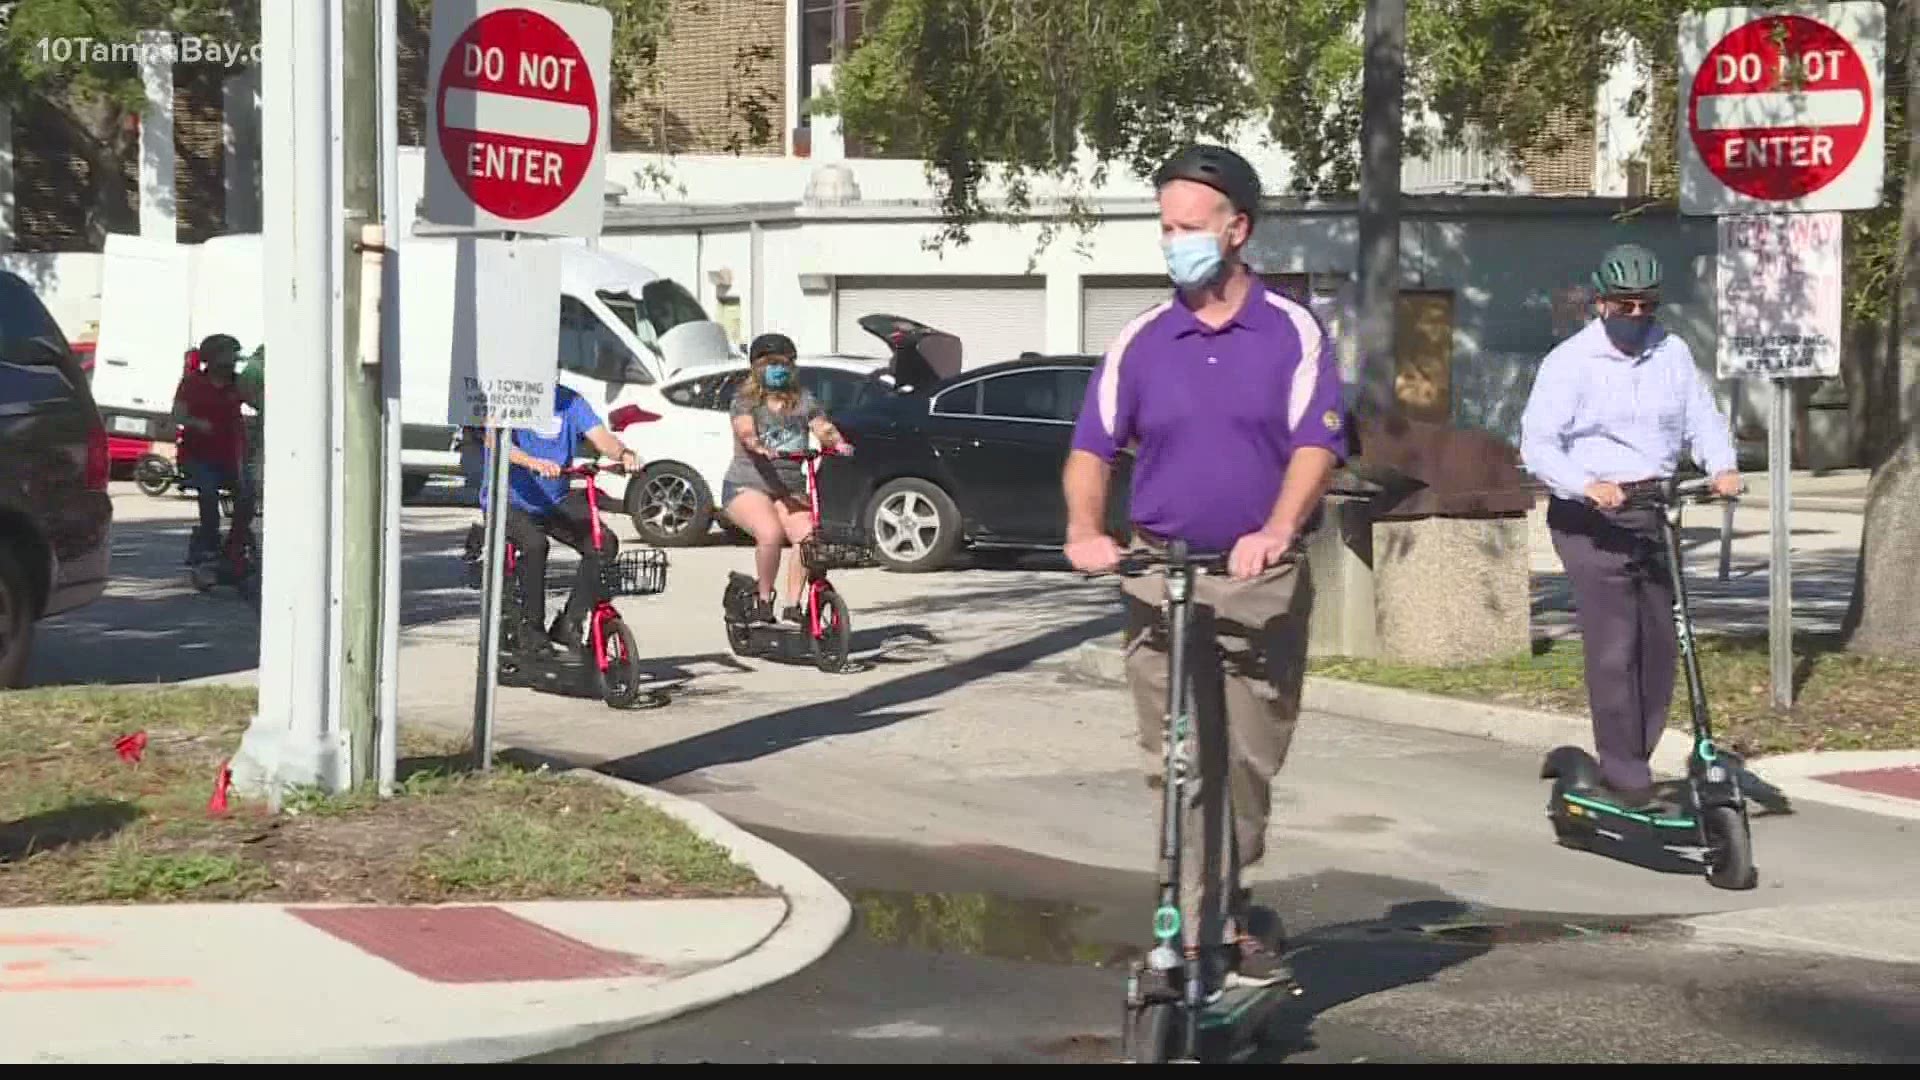 Scooters can be unlocked with an app, need to be ridden on the street, and must be parked in a designated corral.